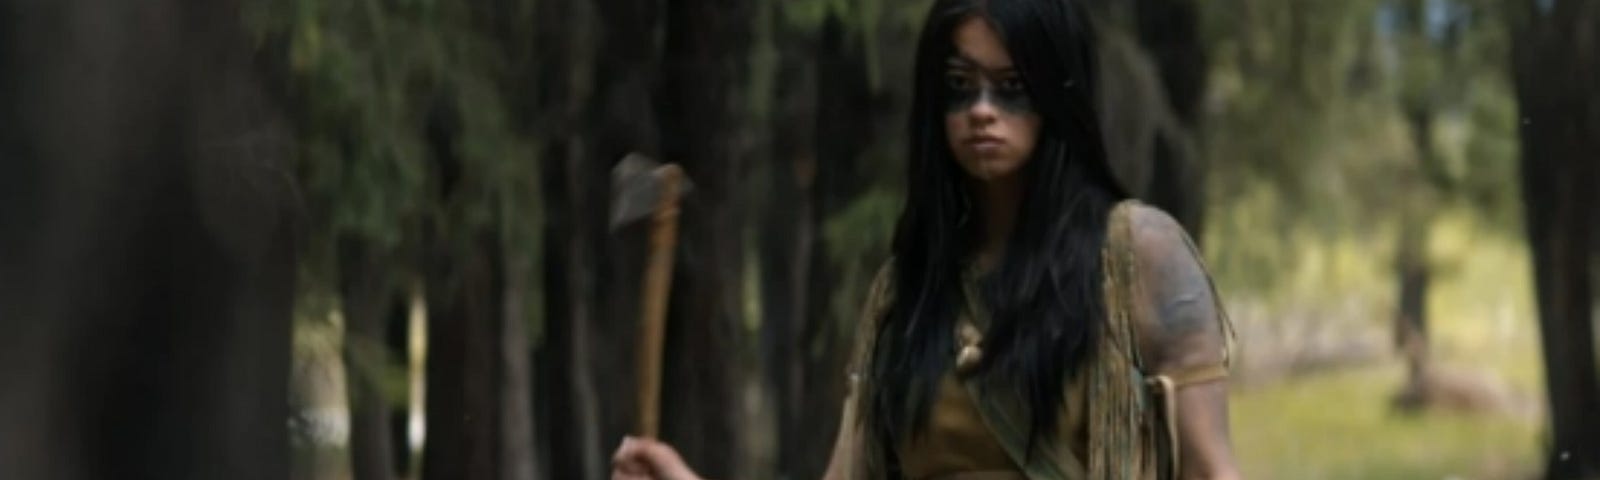 A young indigenous woman with long black hair and wearing buckskin stands in a forest in daylight. She has black face paint across her eyes and holds a tomahawk in her right hand.